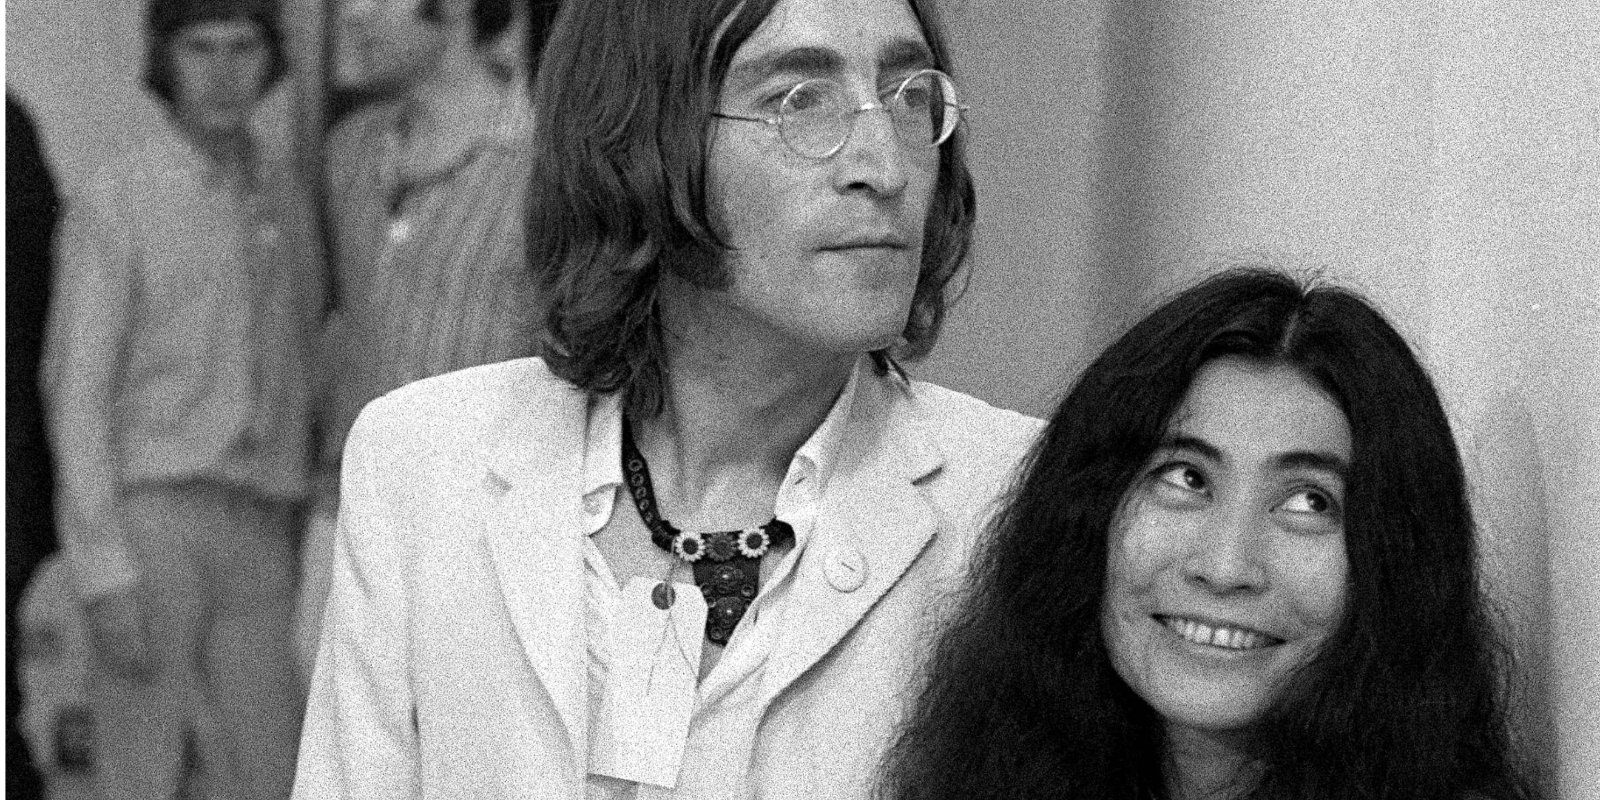 Yoko Ono Once Said She Looked for Something ‘Tender and Weak’ in Men That Brought out Her ‘Mother Instinct’